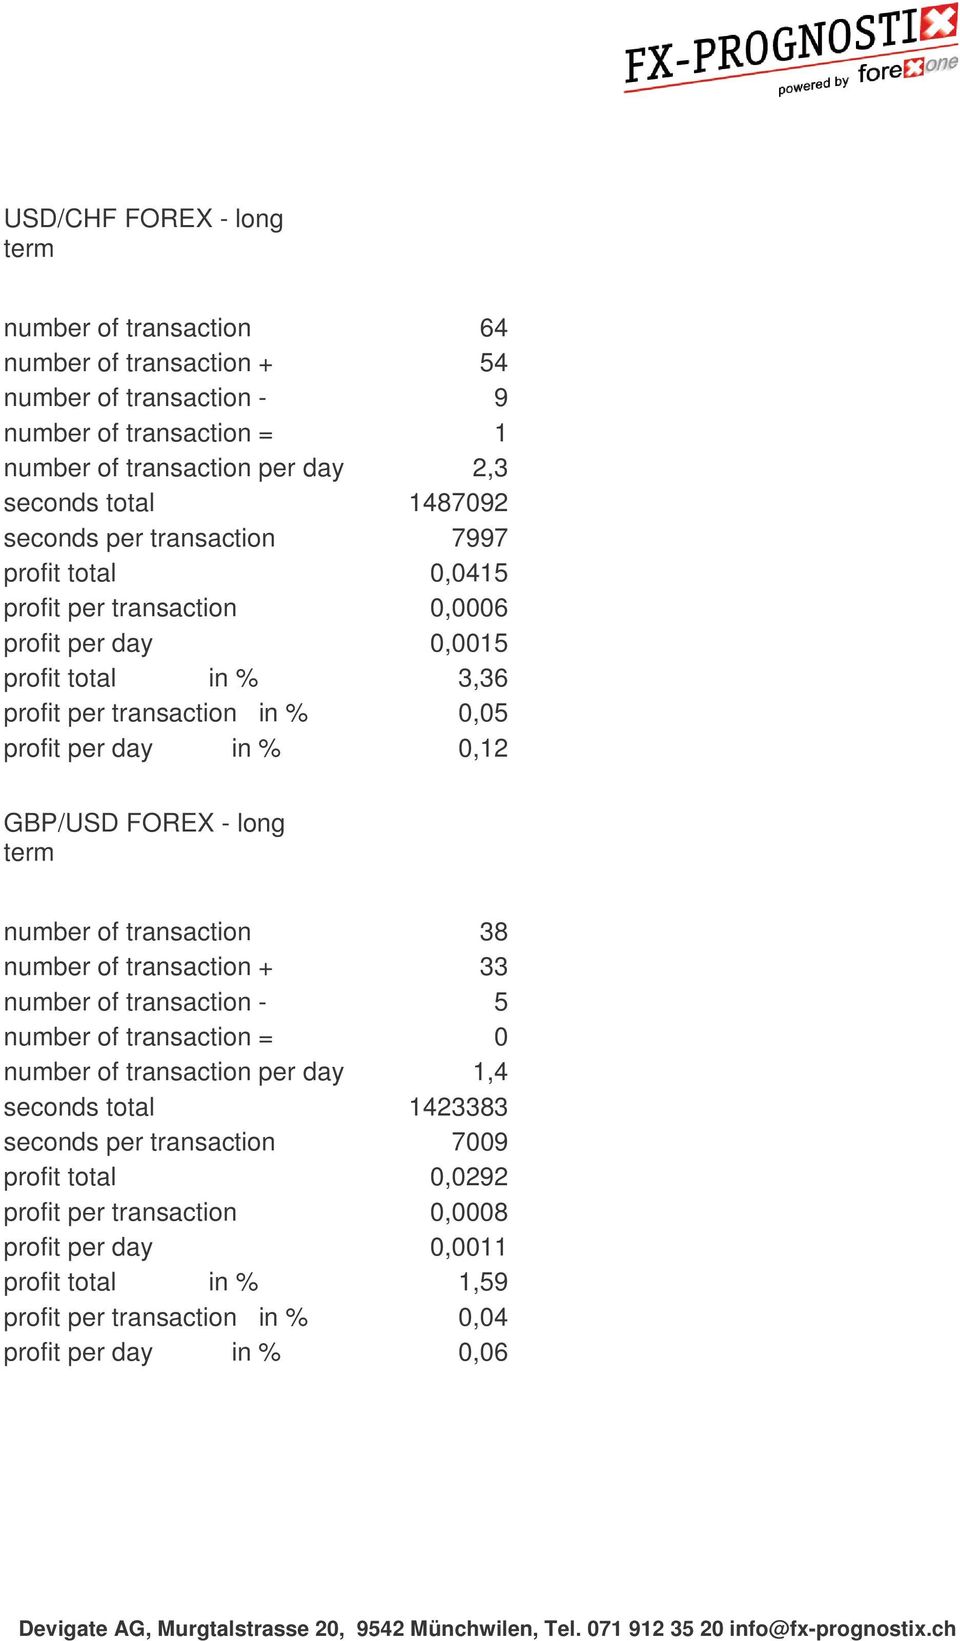 GBP/USD FOREX - long number of transaction 38 number of transaction + 33 number of transaction - 5 number of transaction = 0 number of transaction per day 1,4 seconds total 1423383